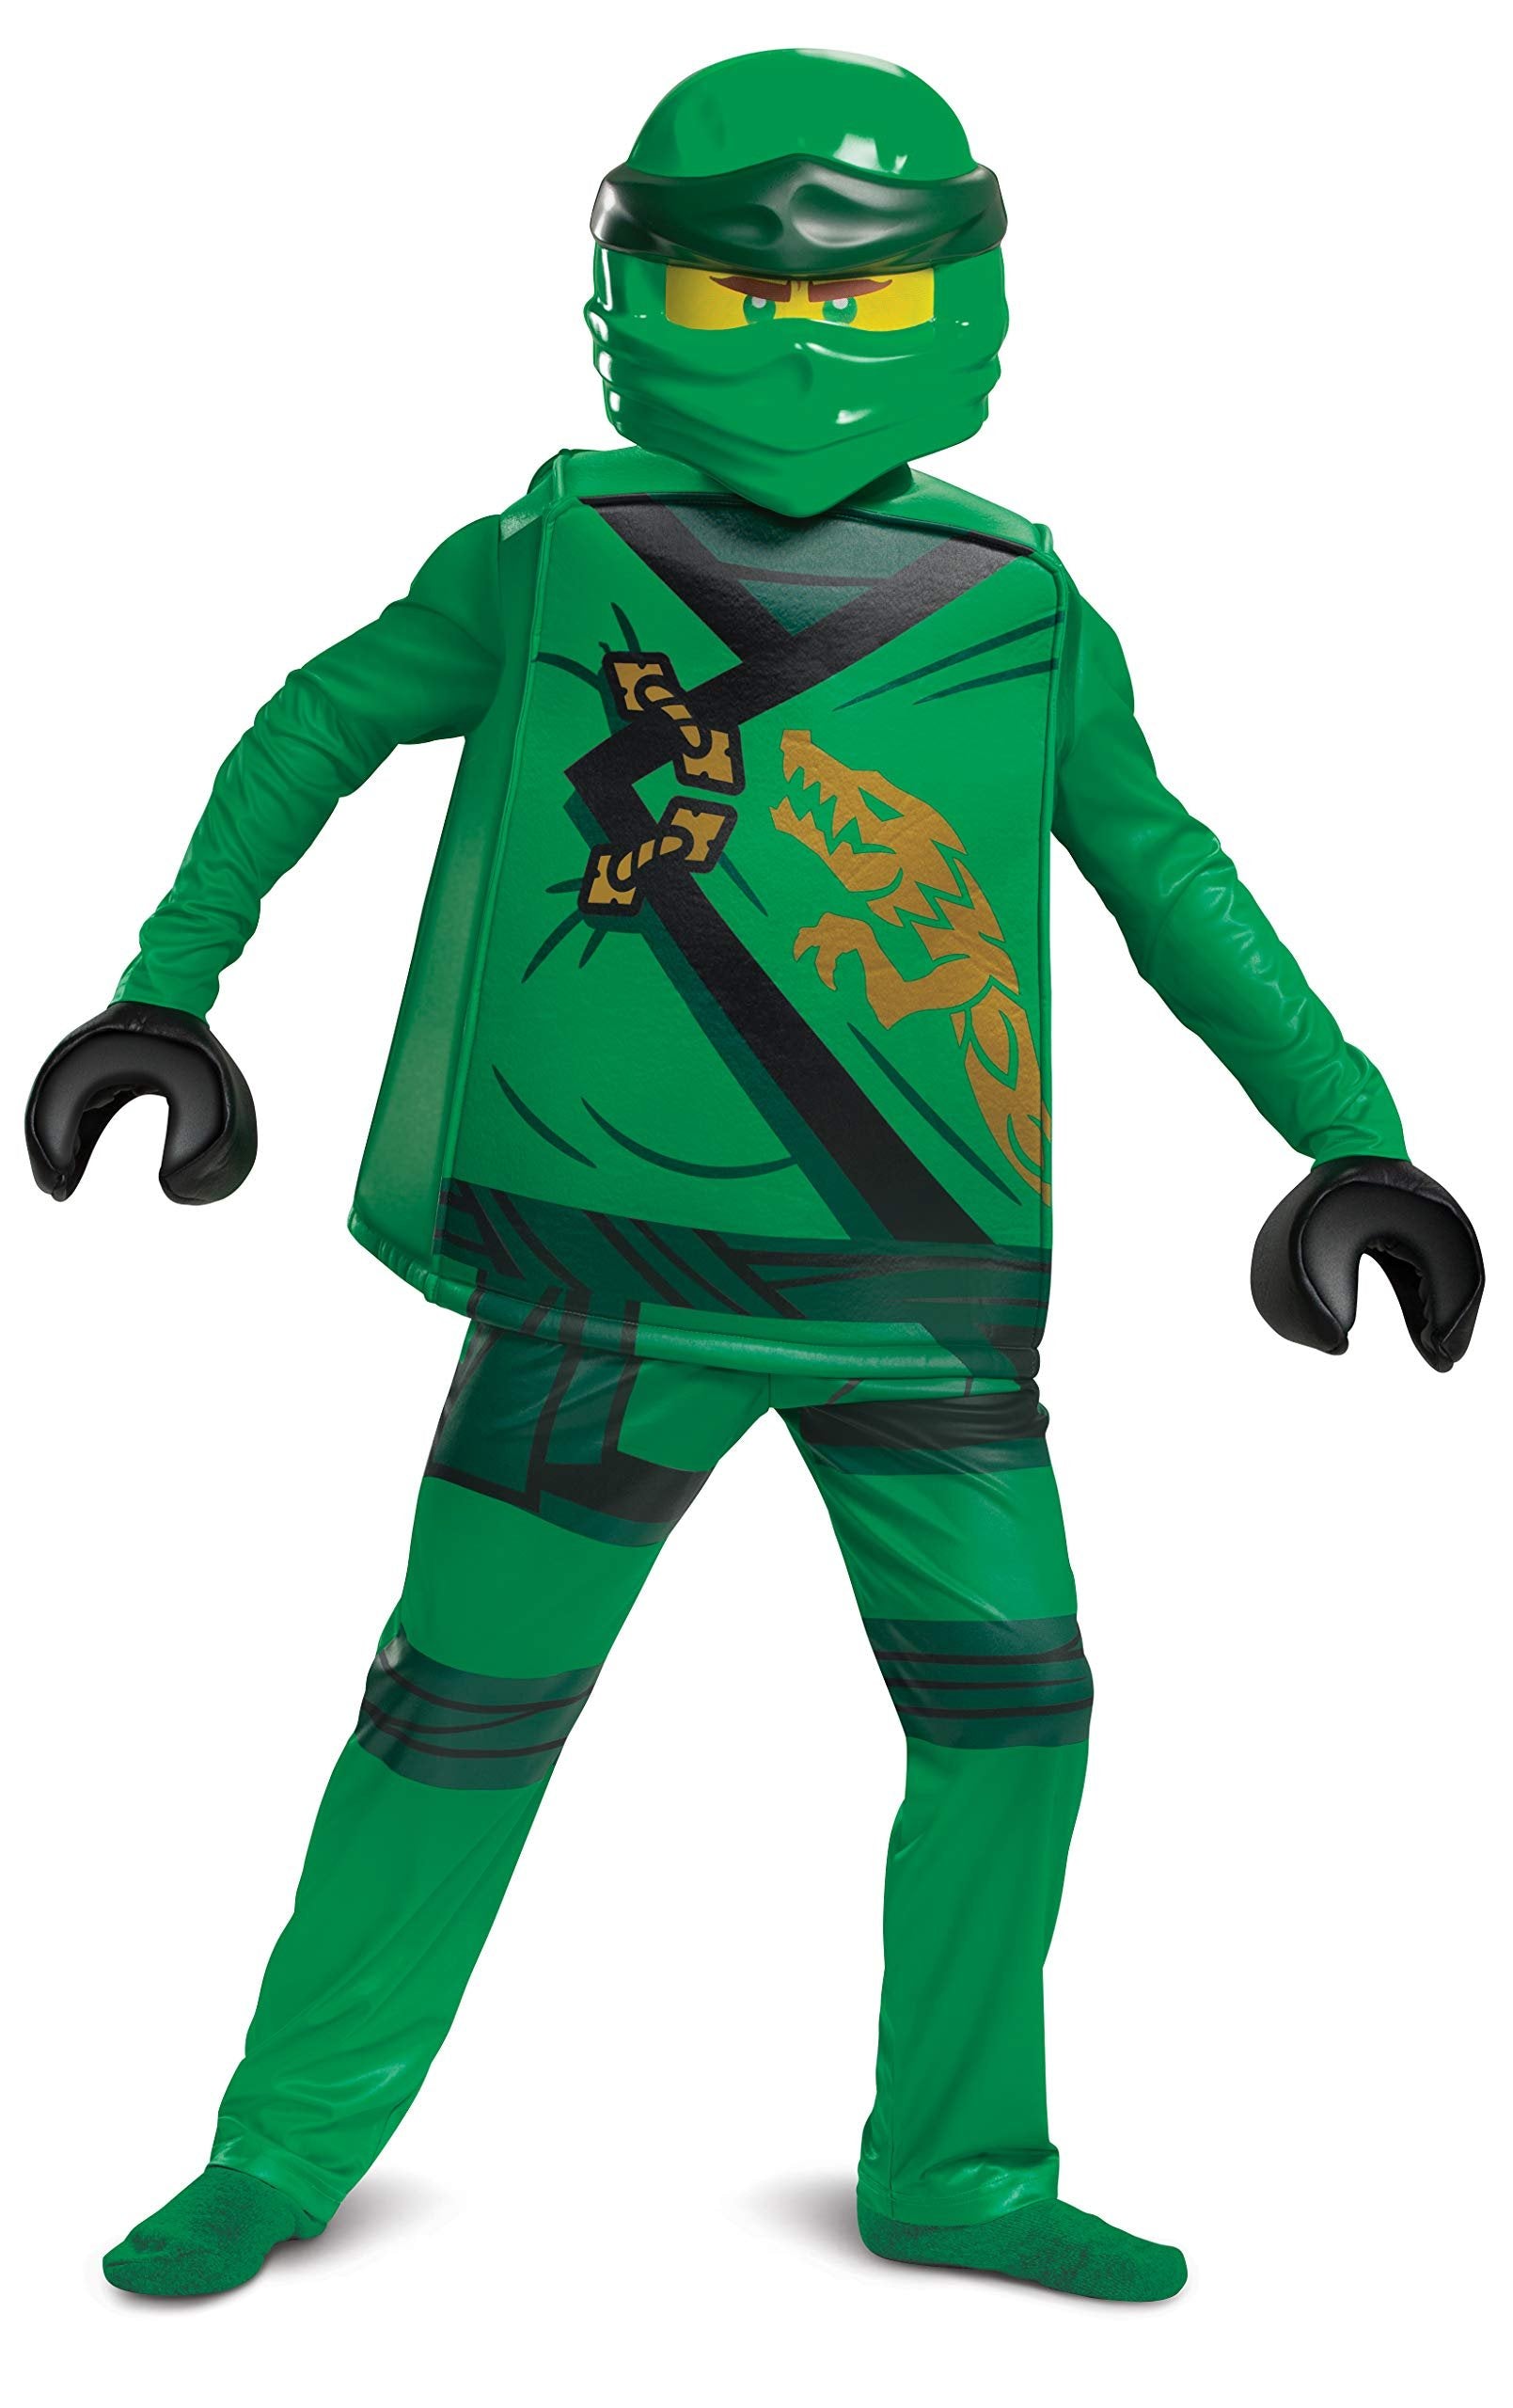 Disguise Lloyd Costume for Kids, Deluxe Lego Ninjago Legacy Themed Children's Character Outfit, Child Size Small (4-6) Green (100399L)